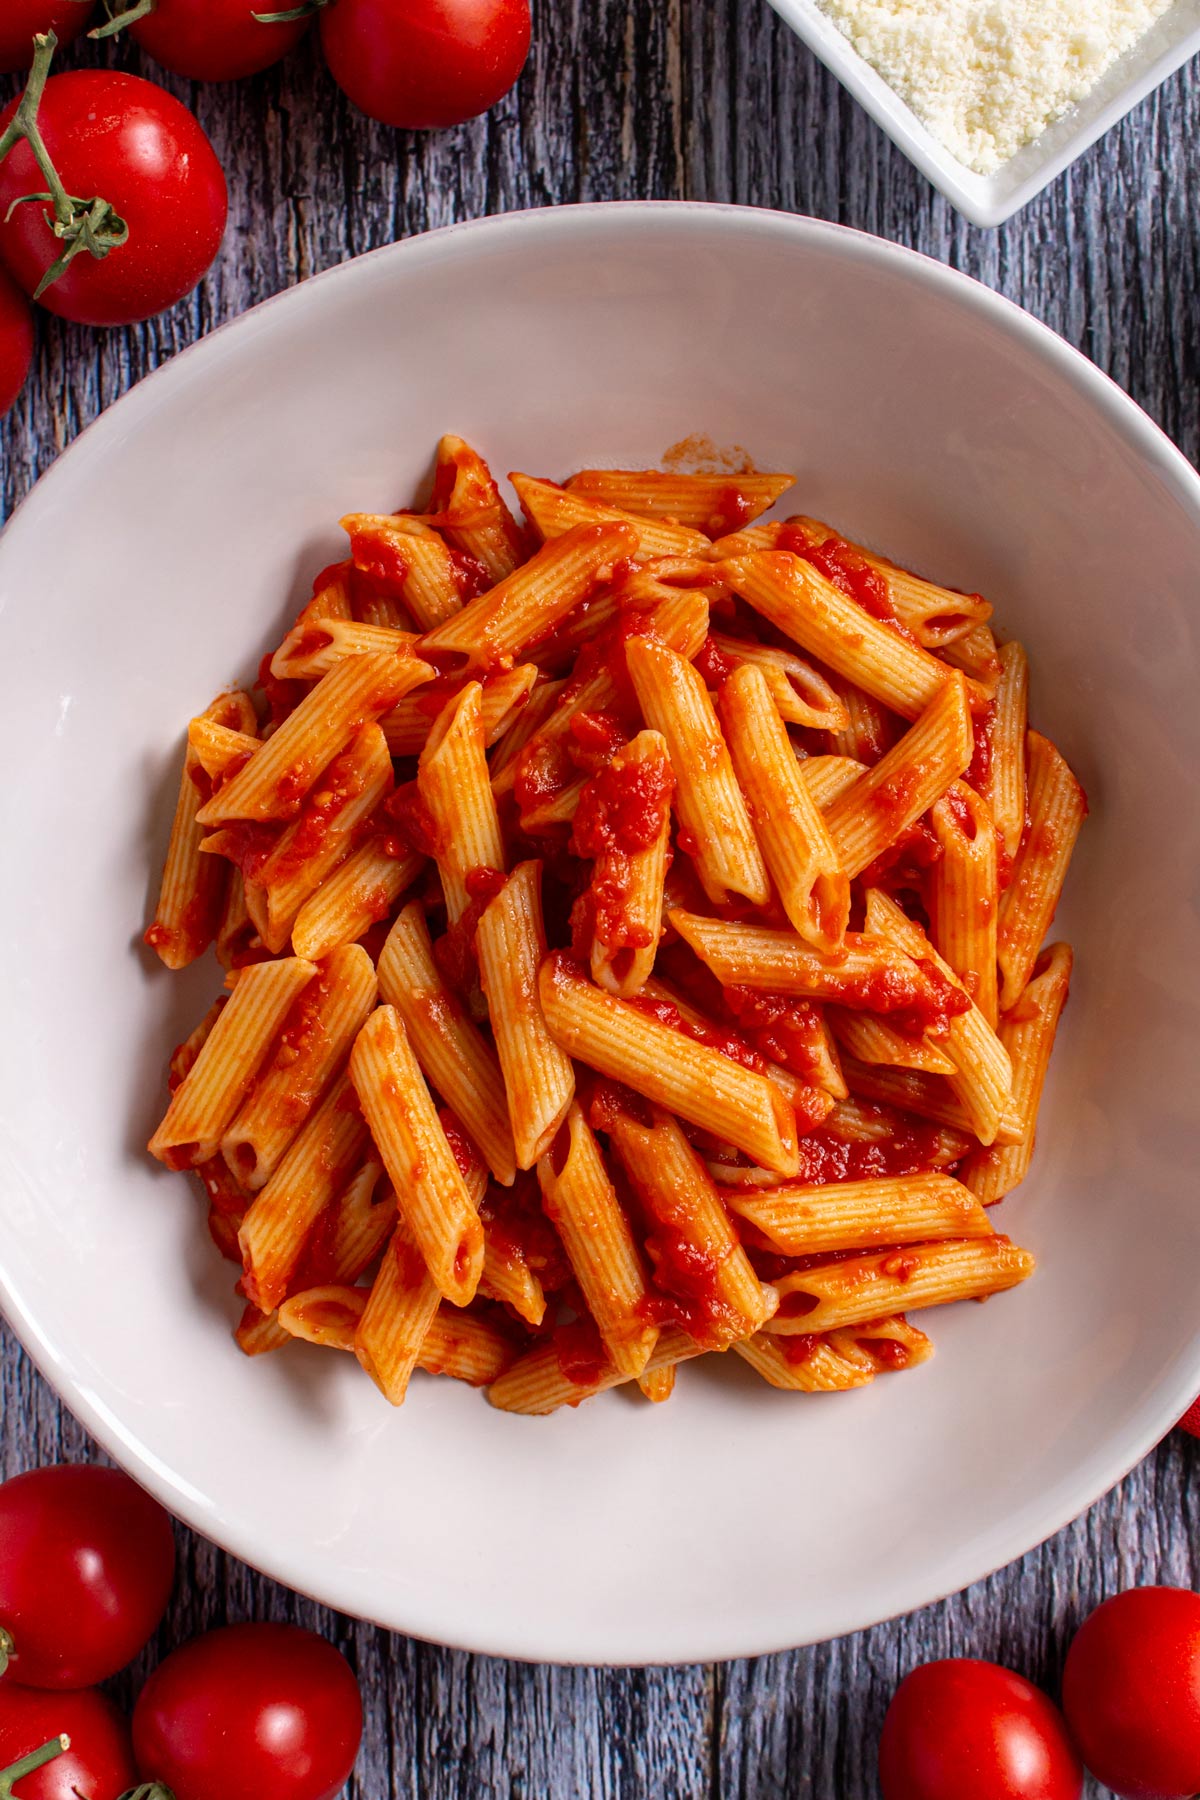 Penne arrabbiata in a wide pasta bowl surrounded by small tomatoes on a wooden background.